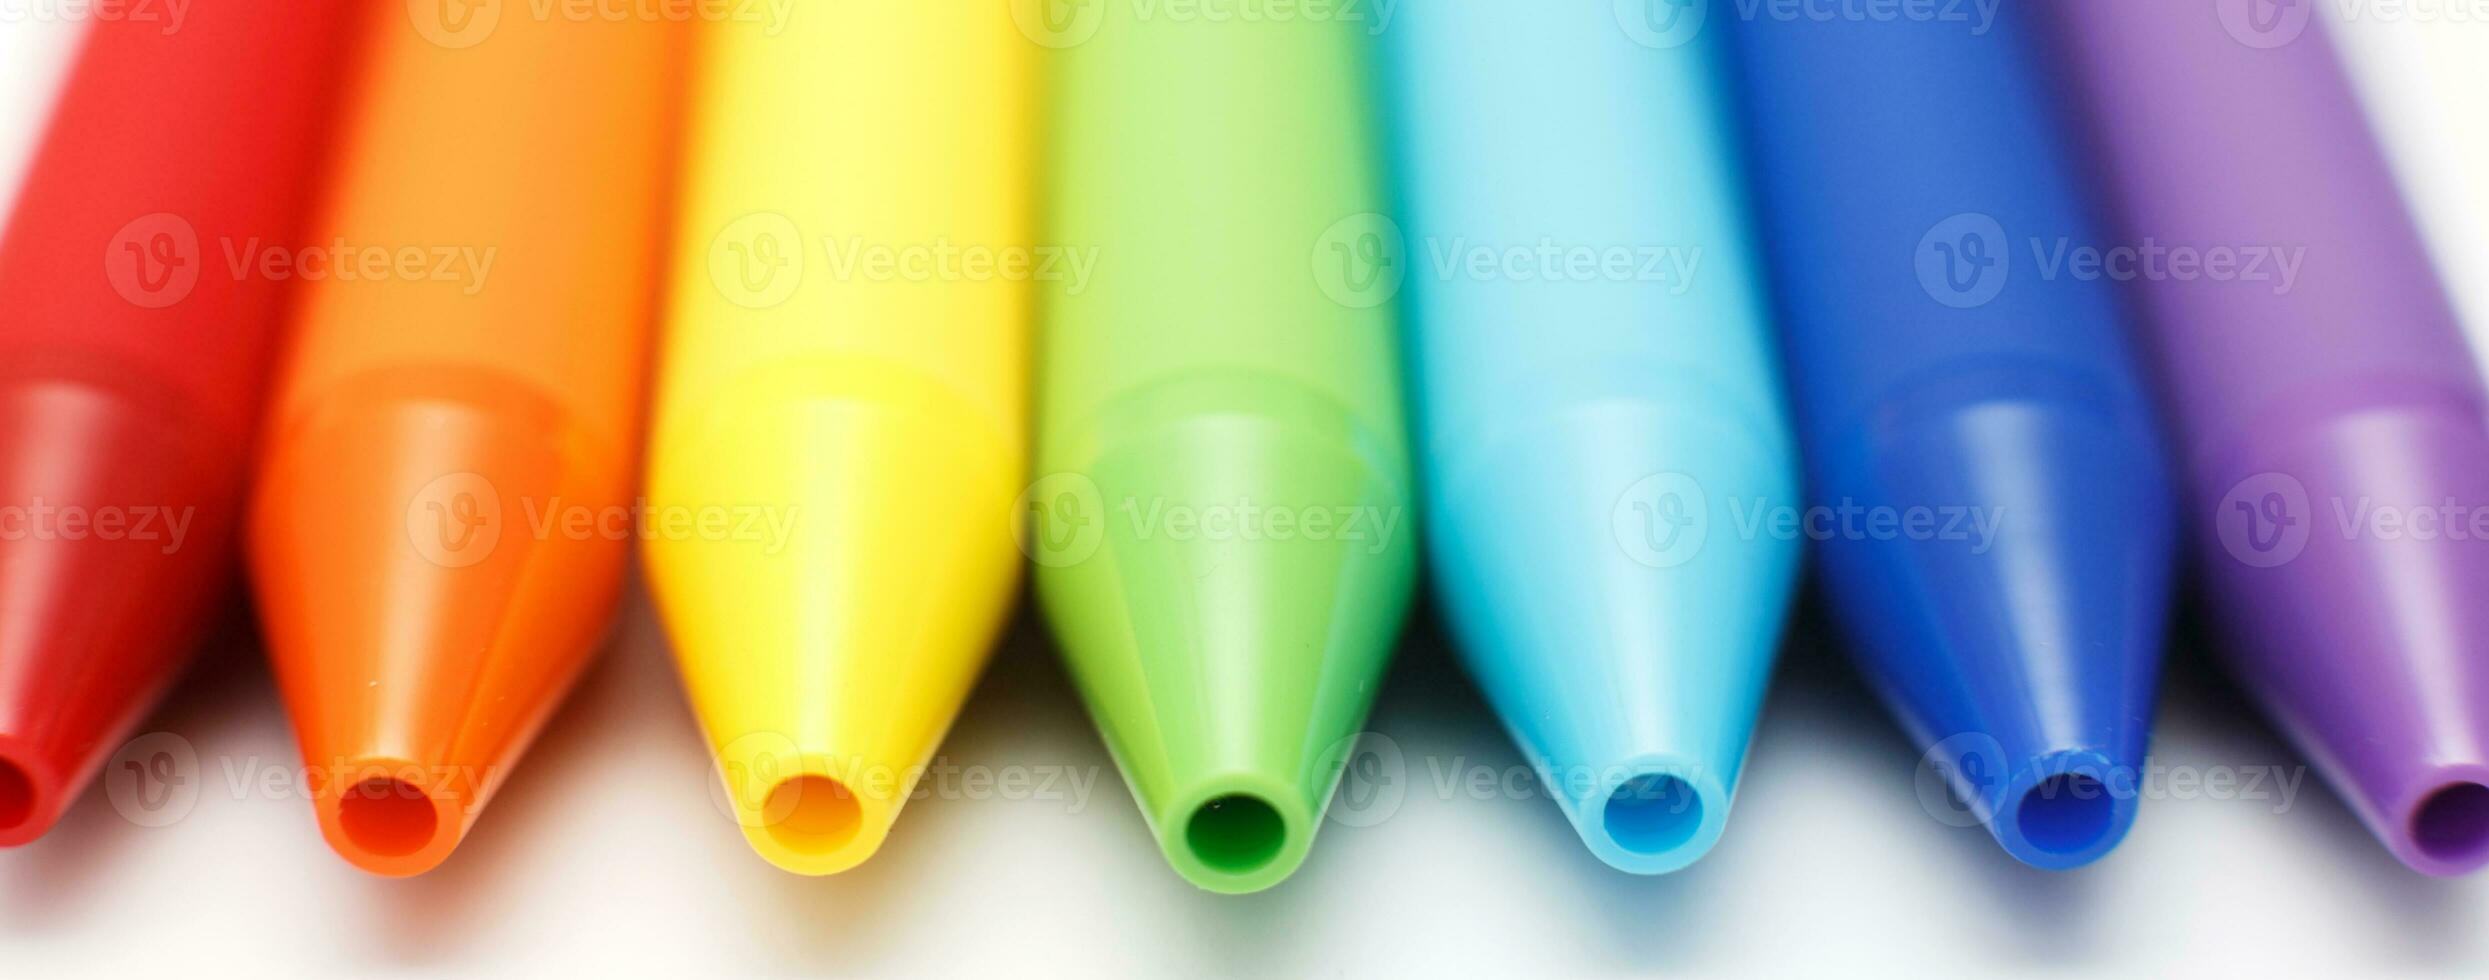 Multicolored gel pens isolated on a white background, close-up. Copy space. banner photo